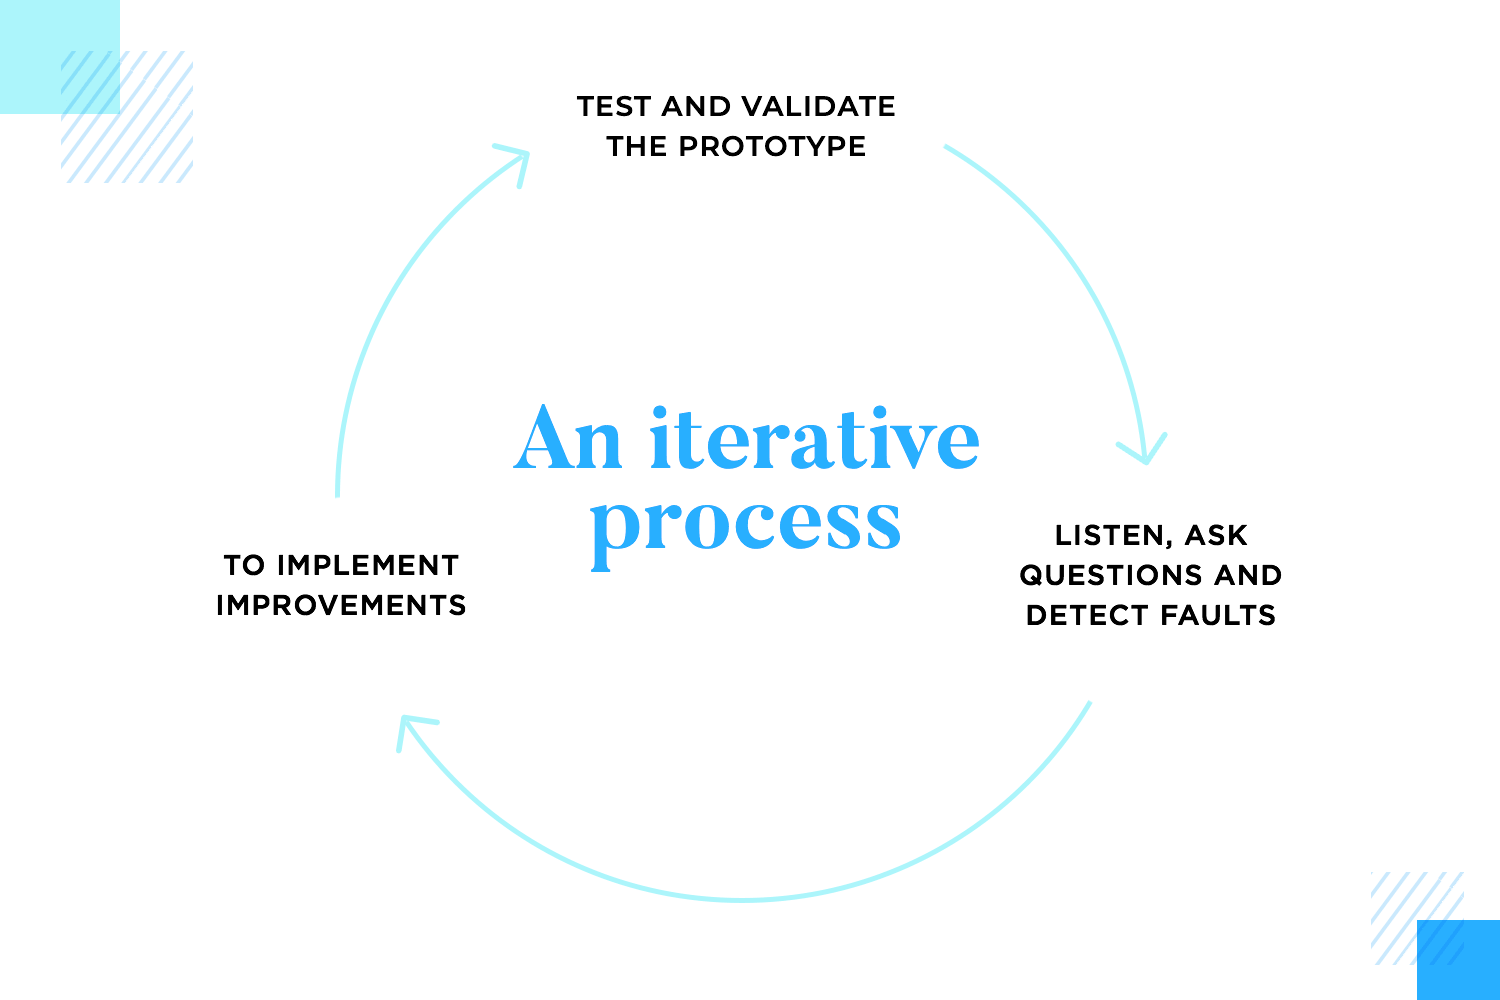 Prototyping should be an iterative design process